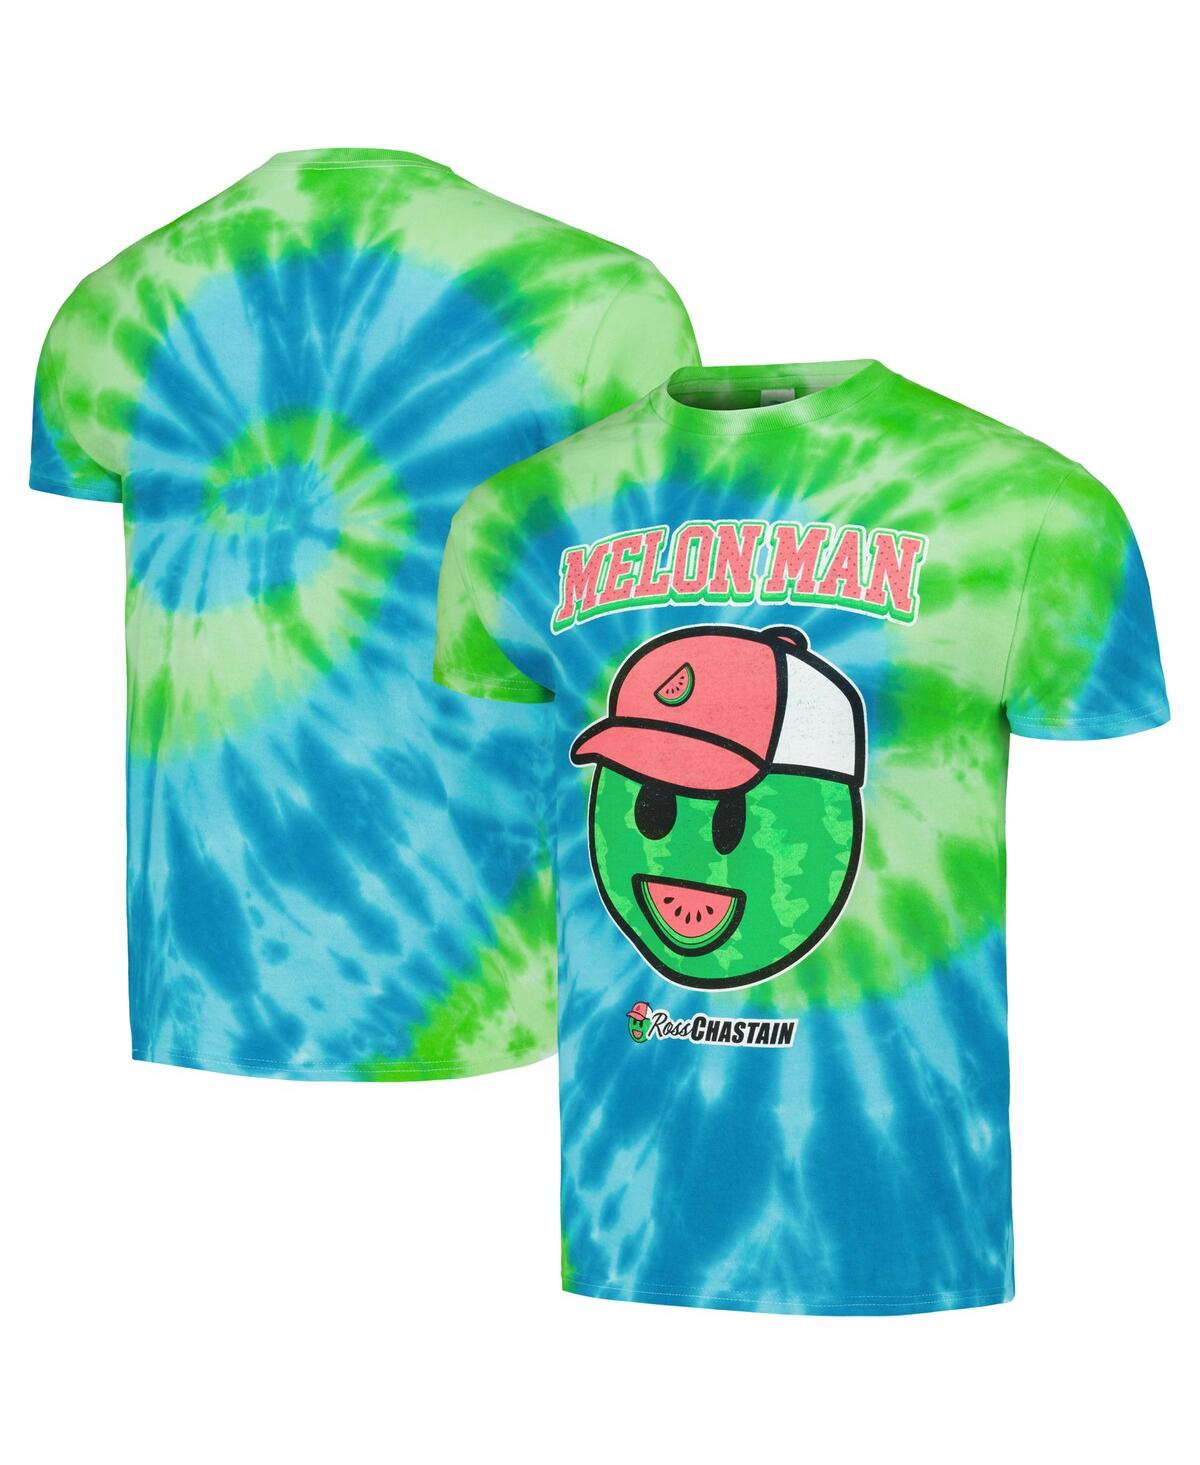 Trackhouse Racing Team Collection Men's  Green, Blue Ross Chastain Melon Man Tie-dyed T-shirt In Green,blue